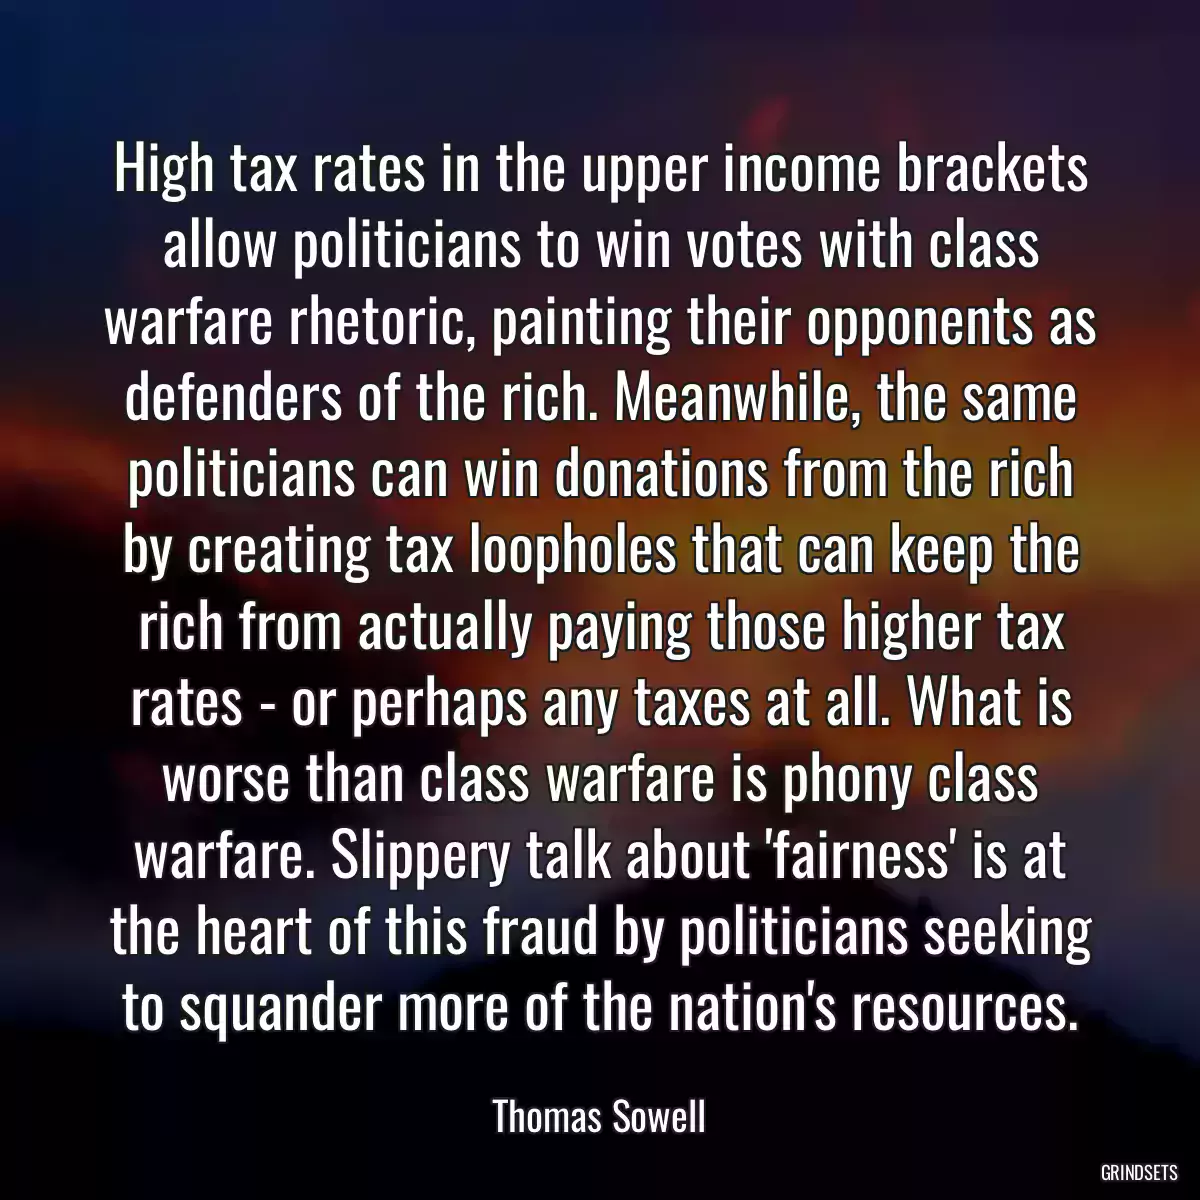 High tax rates in the upper income brackets allow politicians to win votes with class warfare rhetoric, painting their opponents as defenders of the rich. Meanwhile, the same politicians can win donations from the rich by creating tax loopholes that can keep the rich from actually paying those higher tax rates - or perhaps any taxes at all. What is worse than class warfare is phony class warfare. Slippery talk about \'fairness\' is at the heart of this fraud by politicians seeking to squander more of the nation\'s resources.